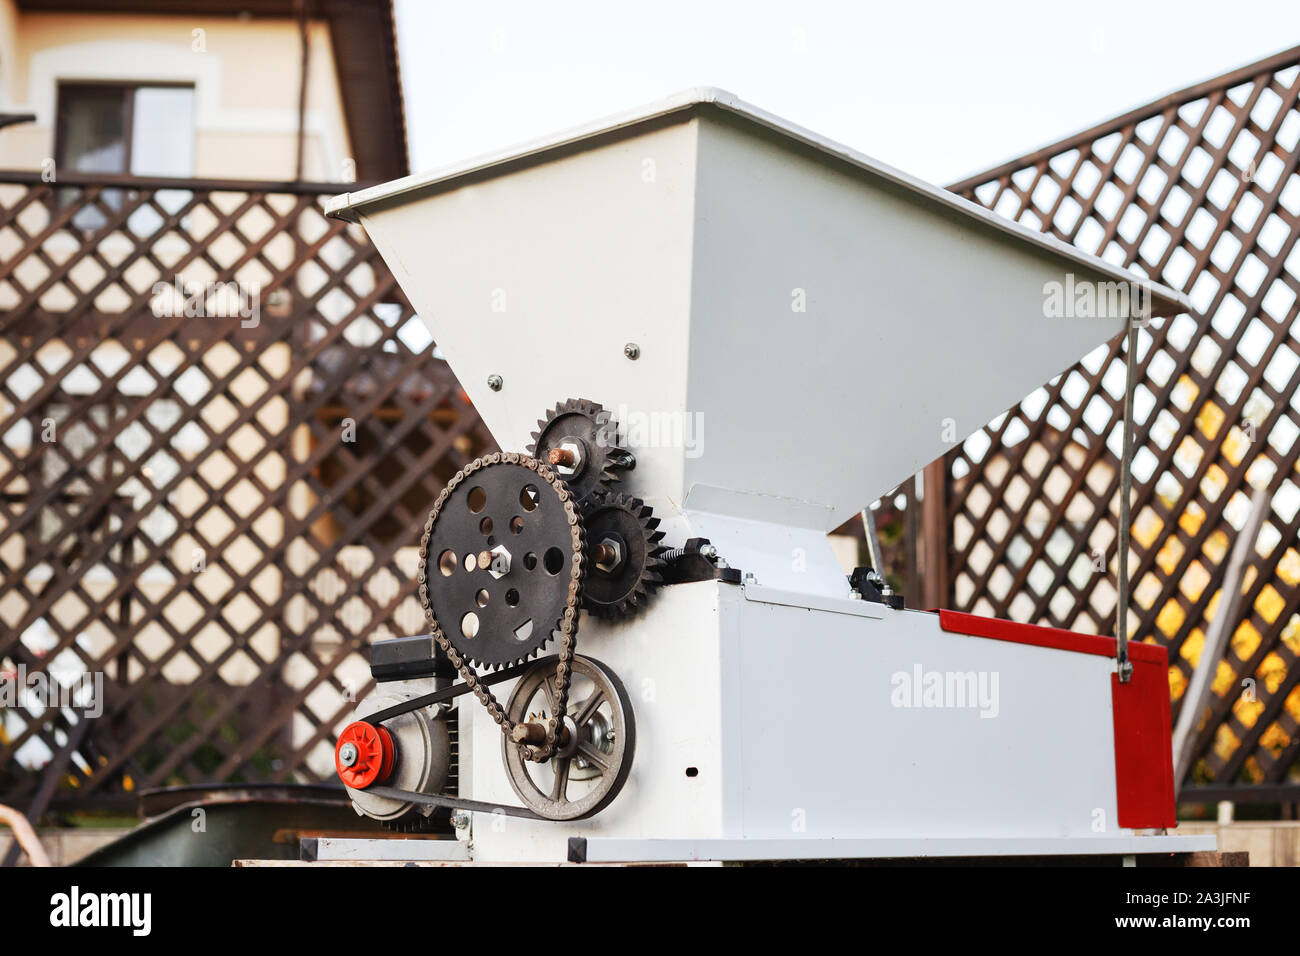 Automatic metal grape crusher for pressing grapes to make wine. Small business concept. Winemaking process. Stock Photo